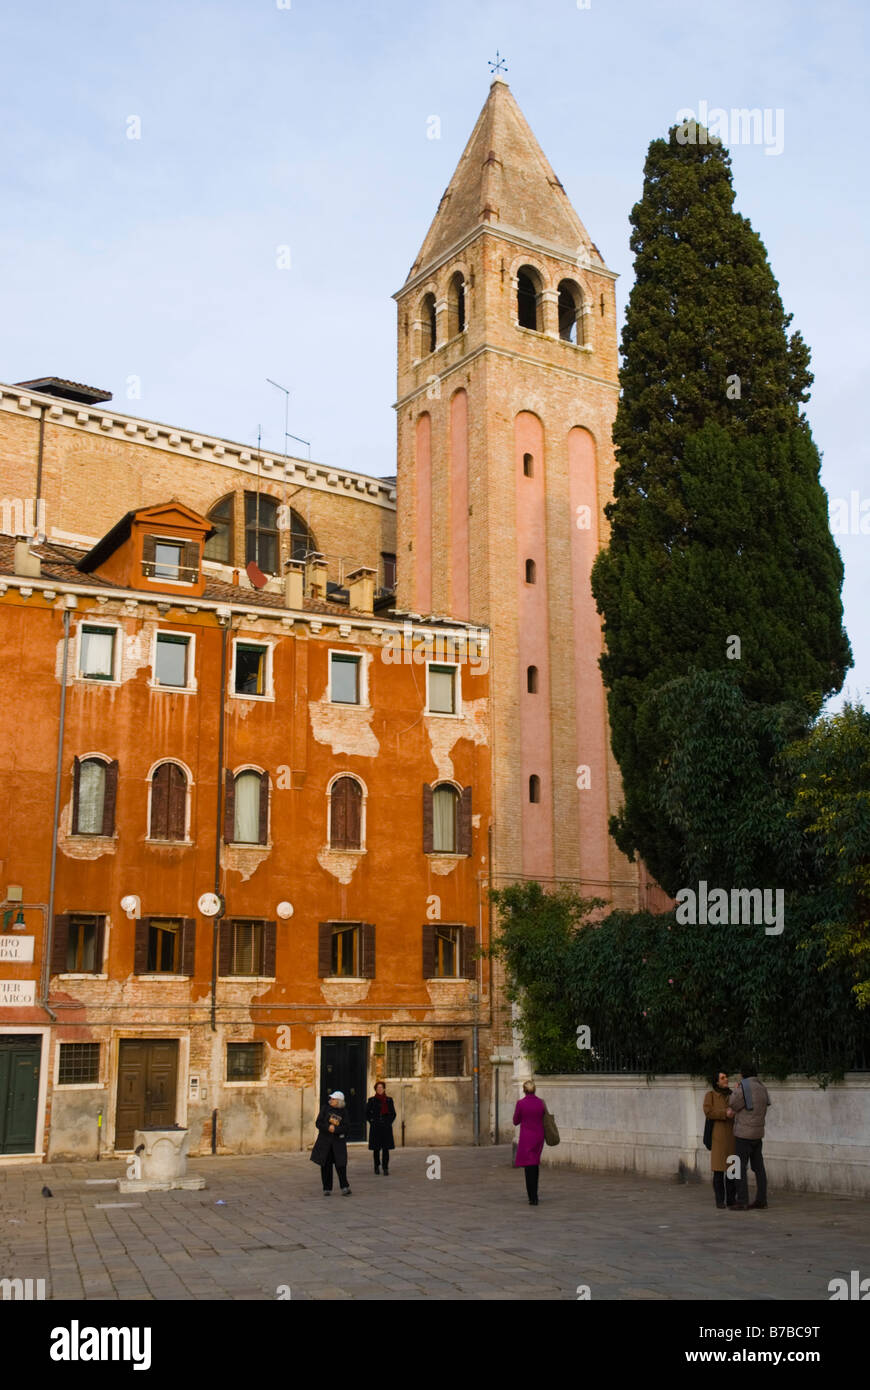 Campo San Vidal square with Chiesa San Vidal church in background in San Marco district of Venice Italy Europe Stock Photo